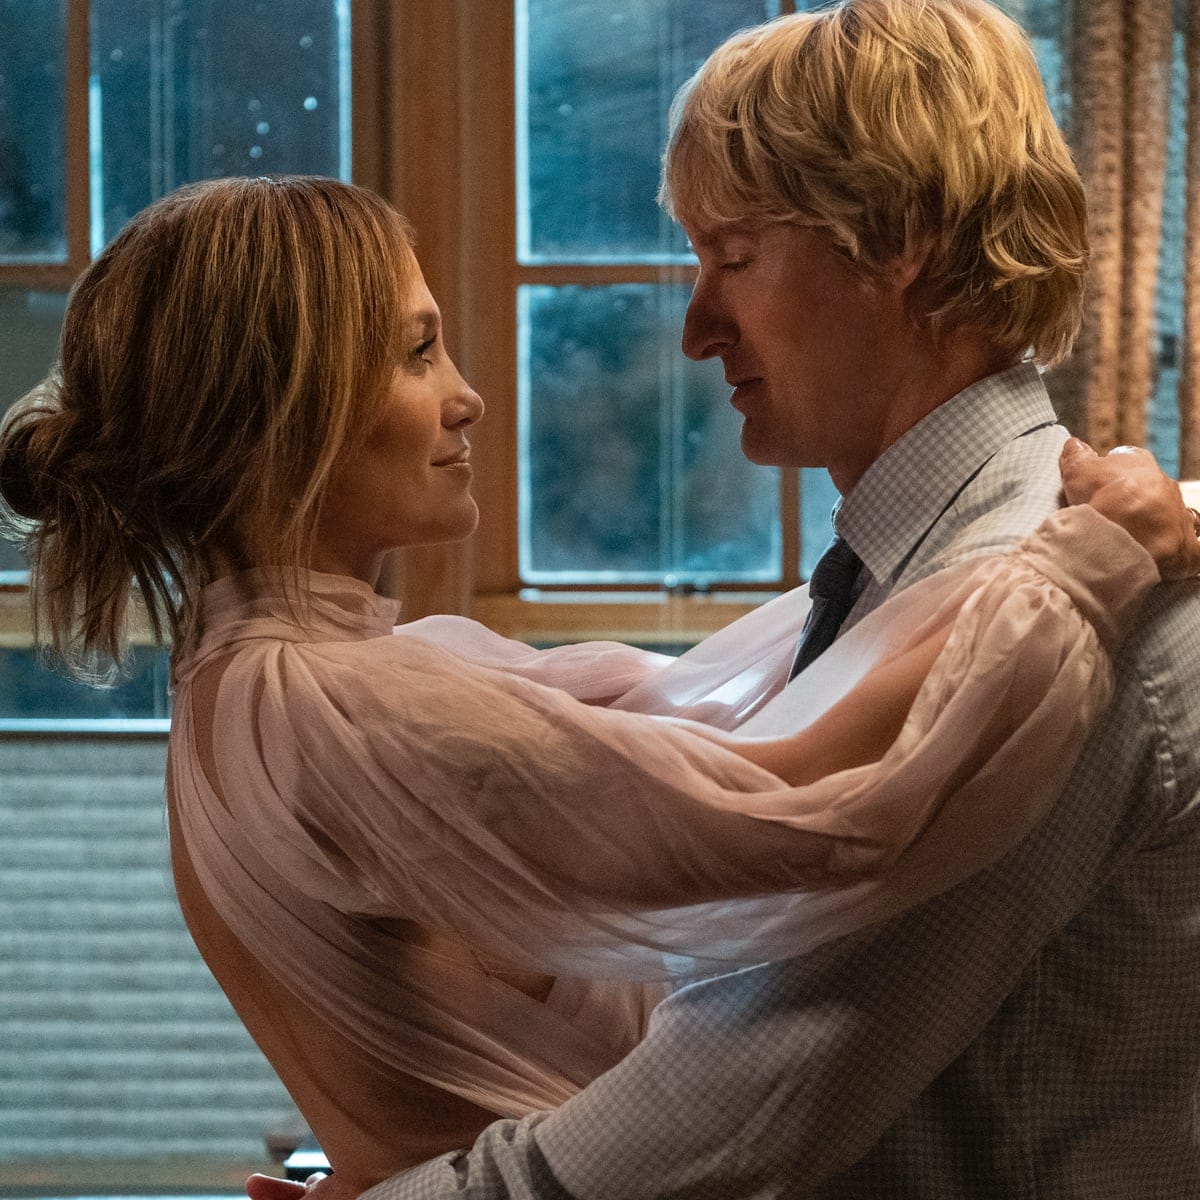 Jennifer Lopez, Owen Wilson, and Maluma describe their characters in their upcoming film ‘Marry Me’